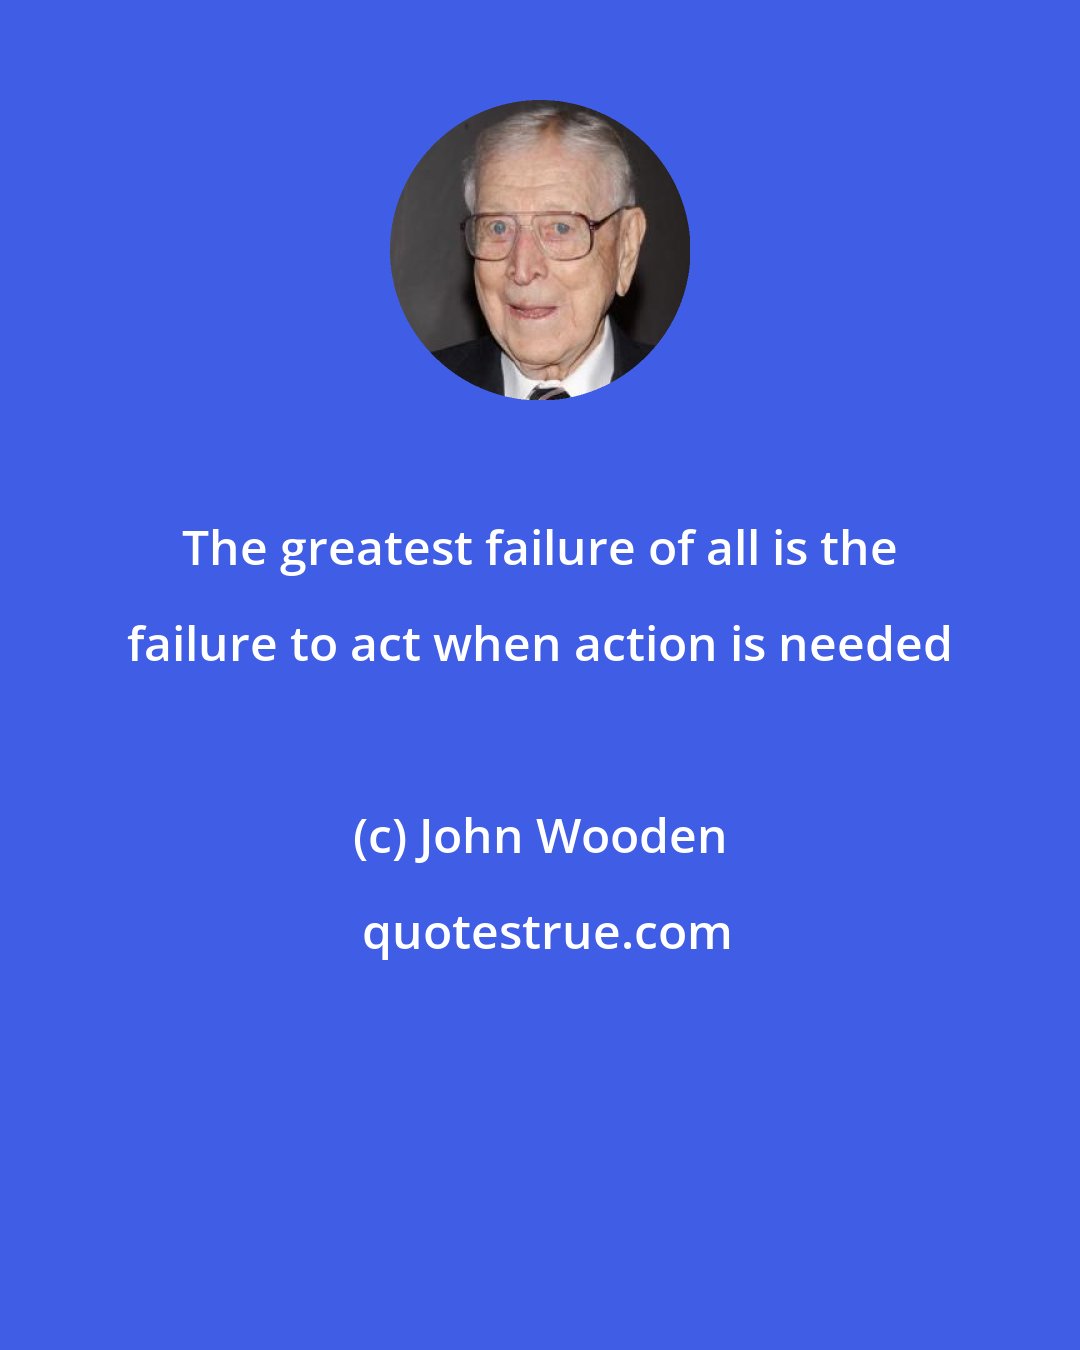 John Wooden: The greatest failure of all is the failure to act when action is needed